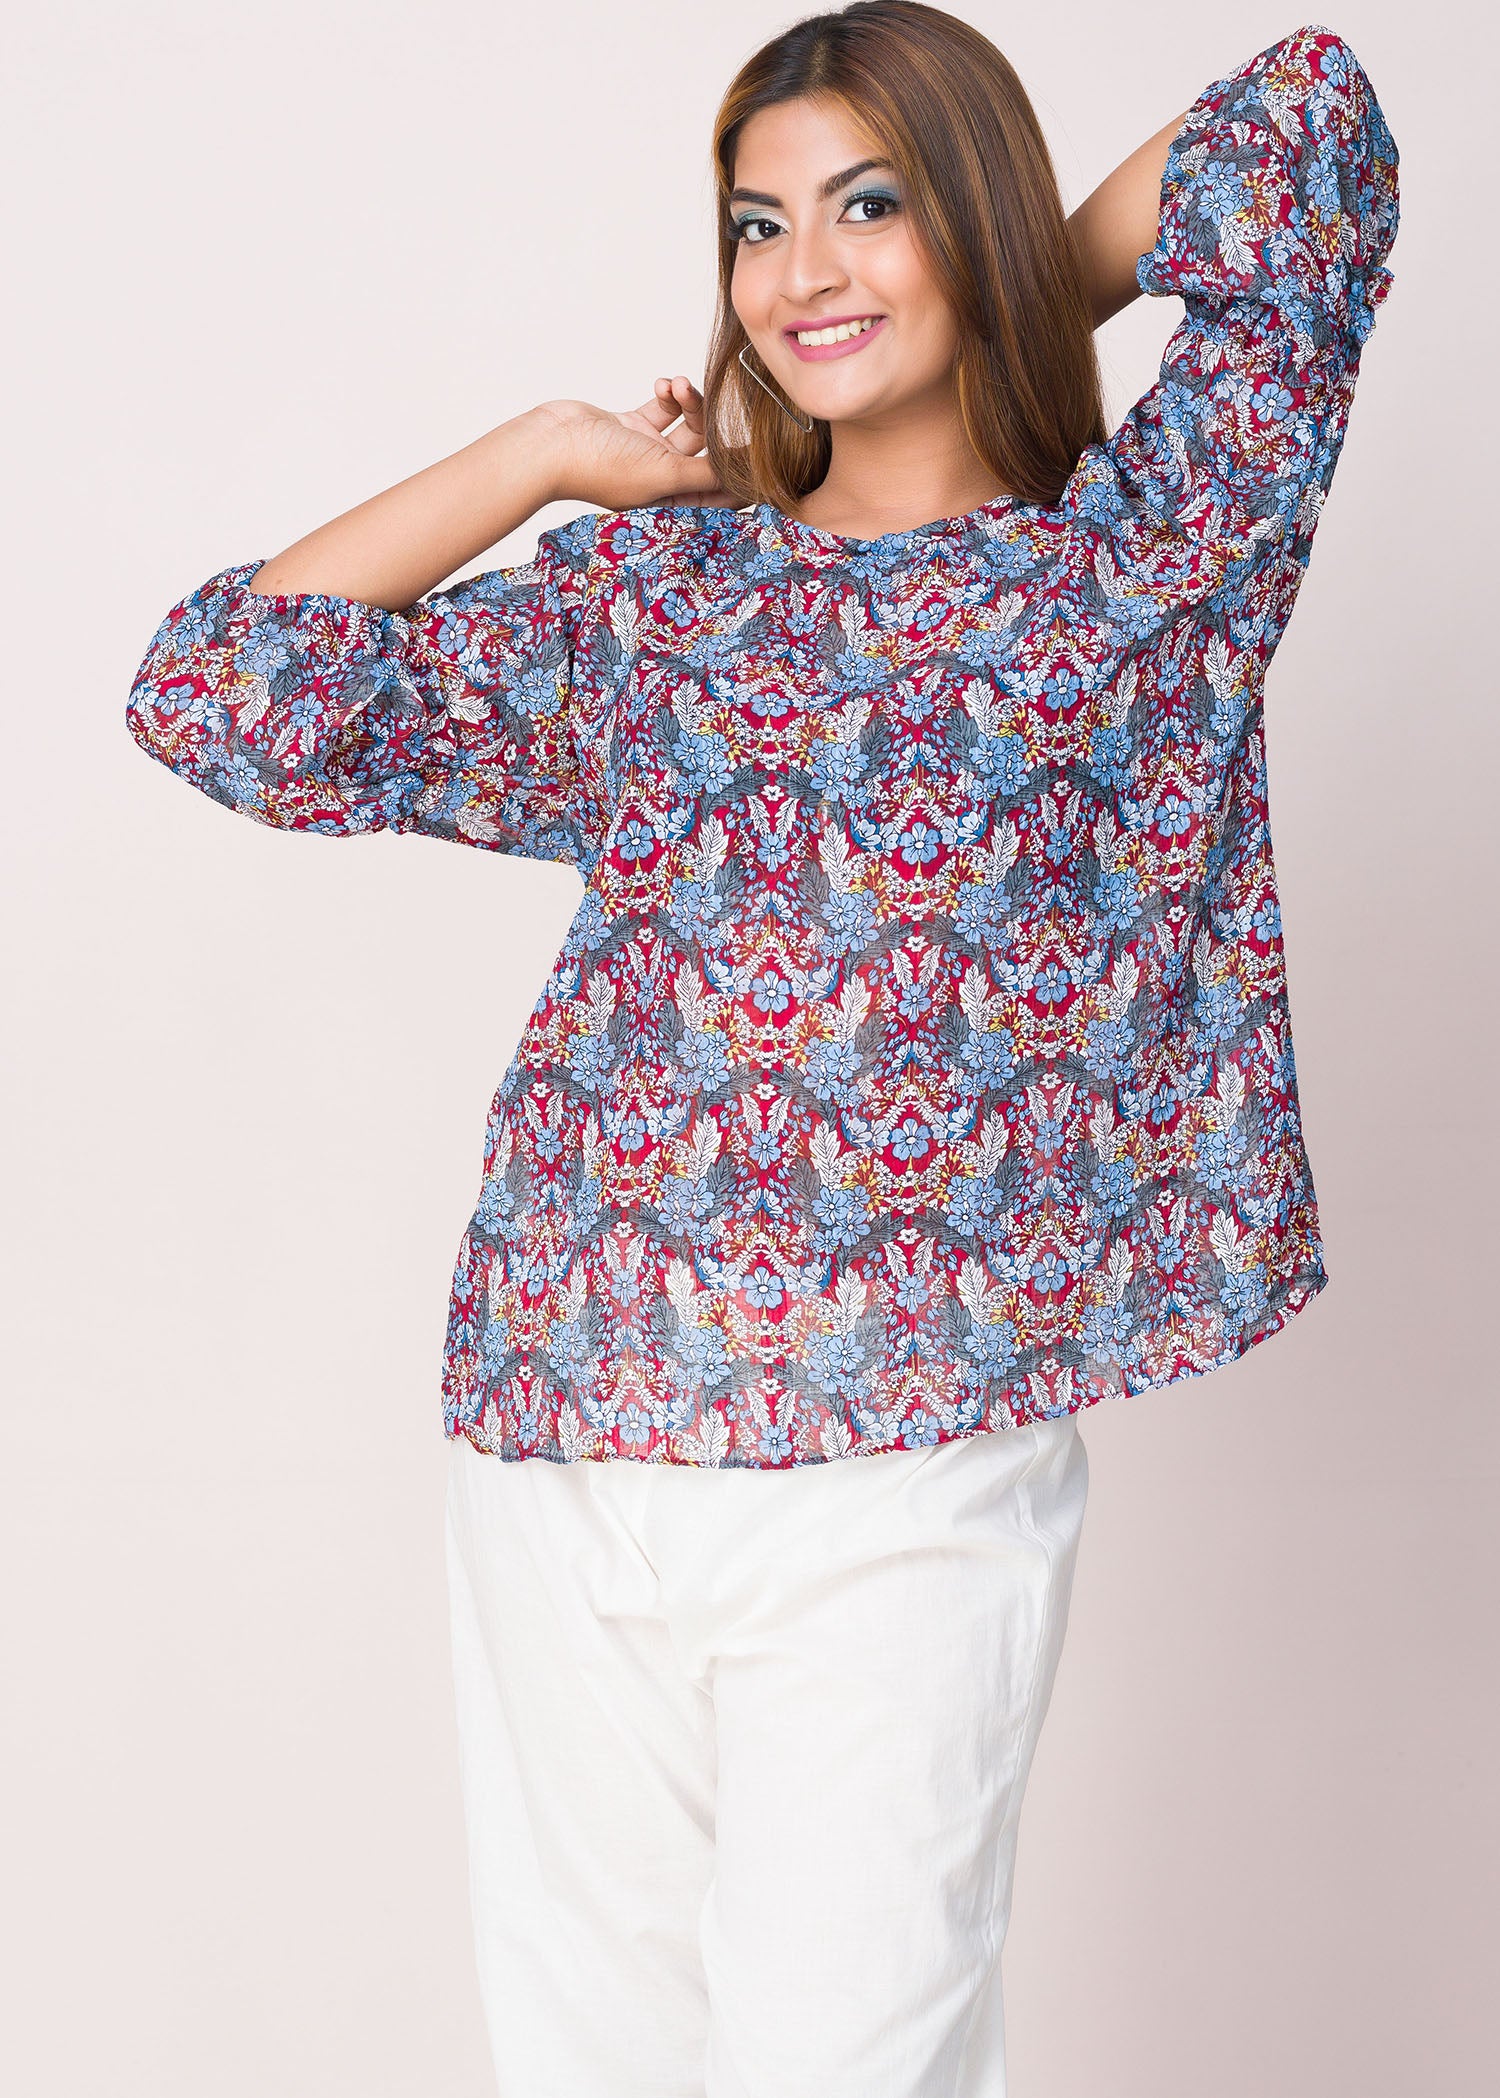 Aesthetic Floral Art Printed Blouse